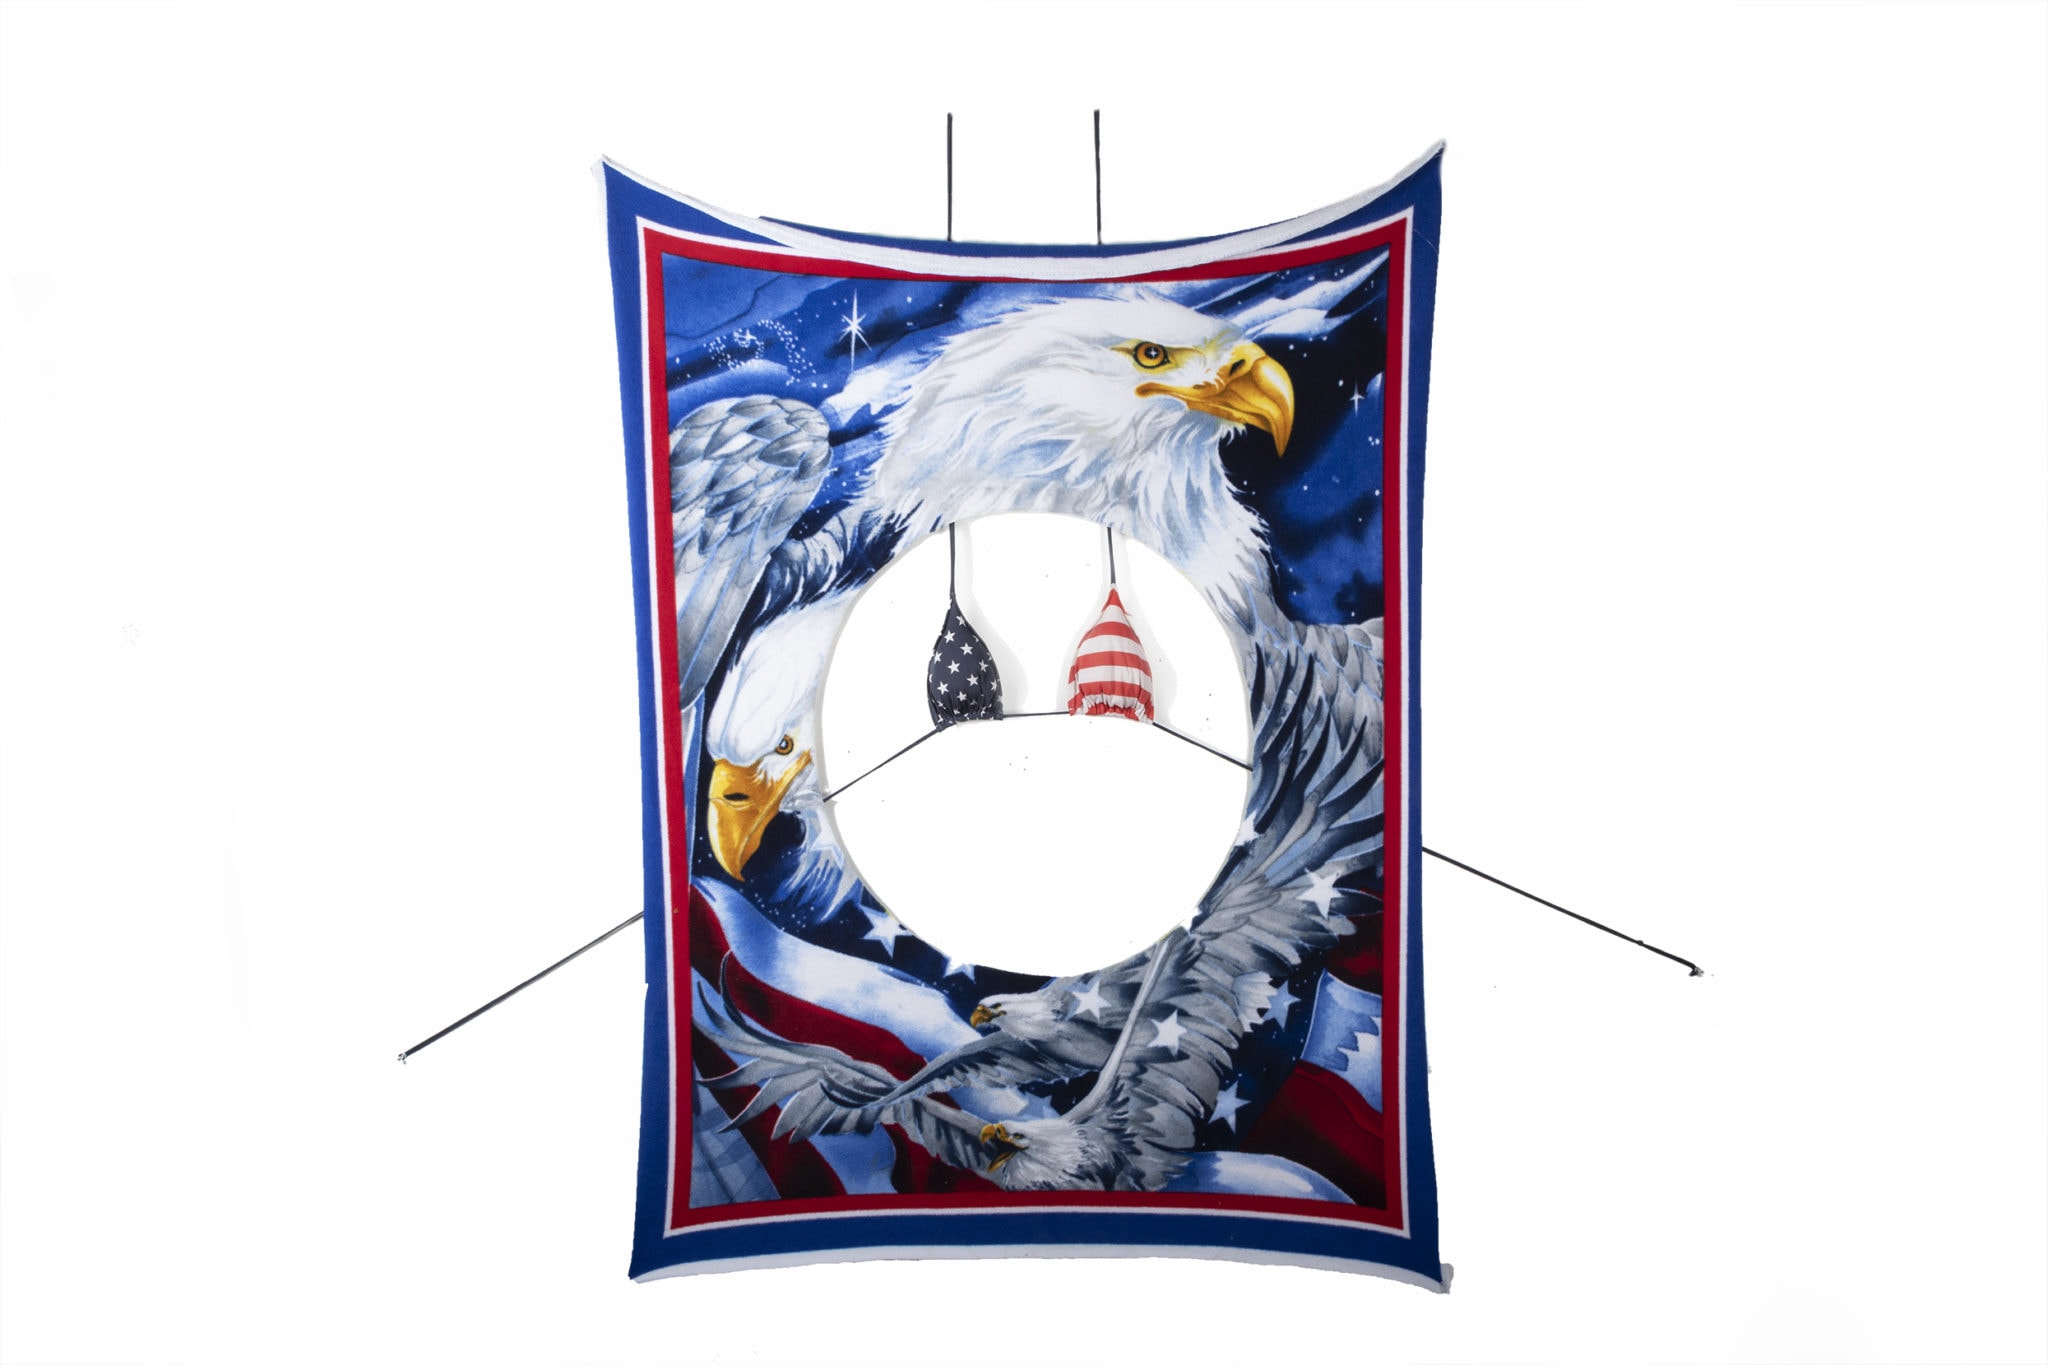 Image of Bella Maria Varela’s American GRL artwork. American flag and eagles on a four-foot by 10-foot blanket with a large circle cutout. A red, white, and blue US flag bikini top hangs behind the blanket and can be seen through the cutout.